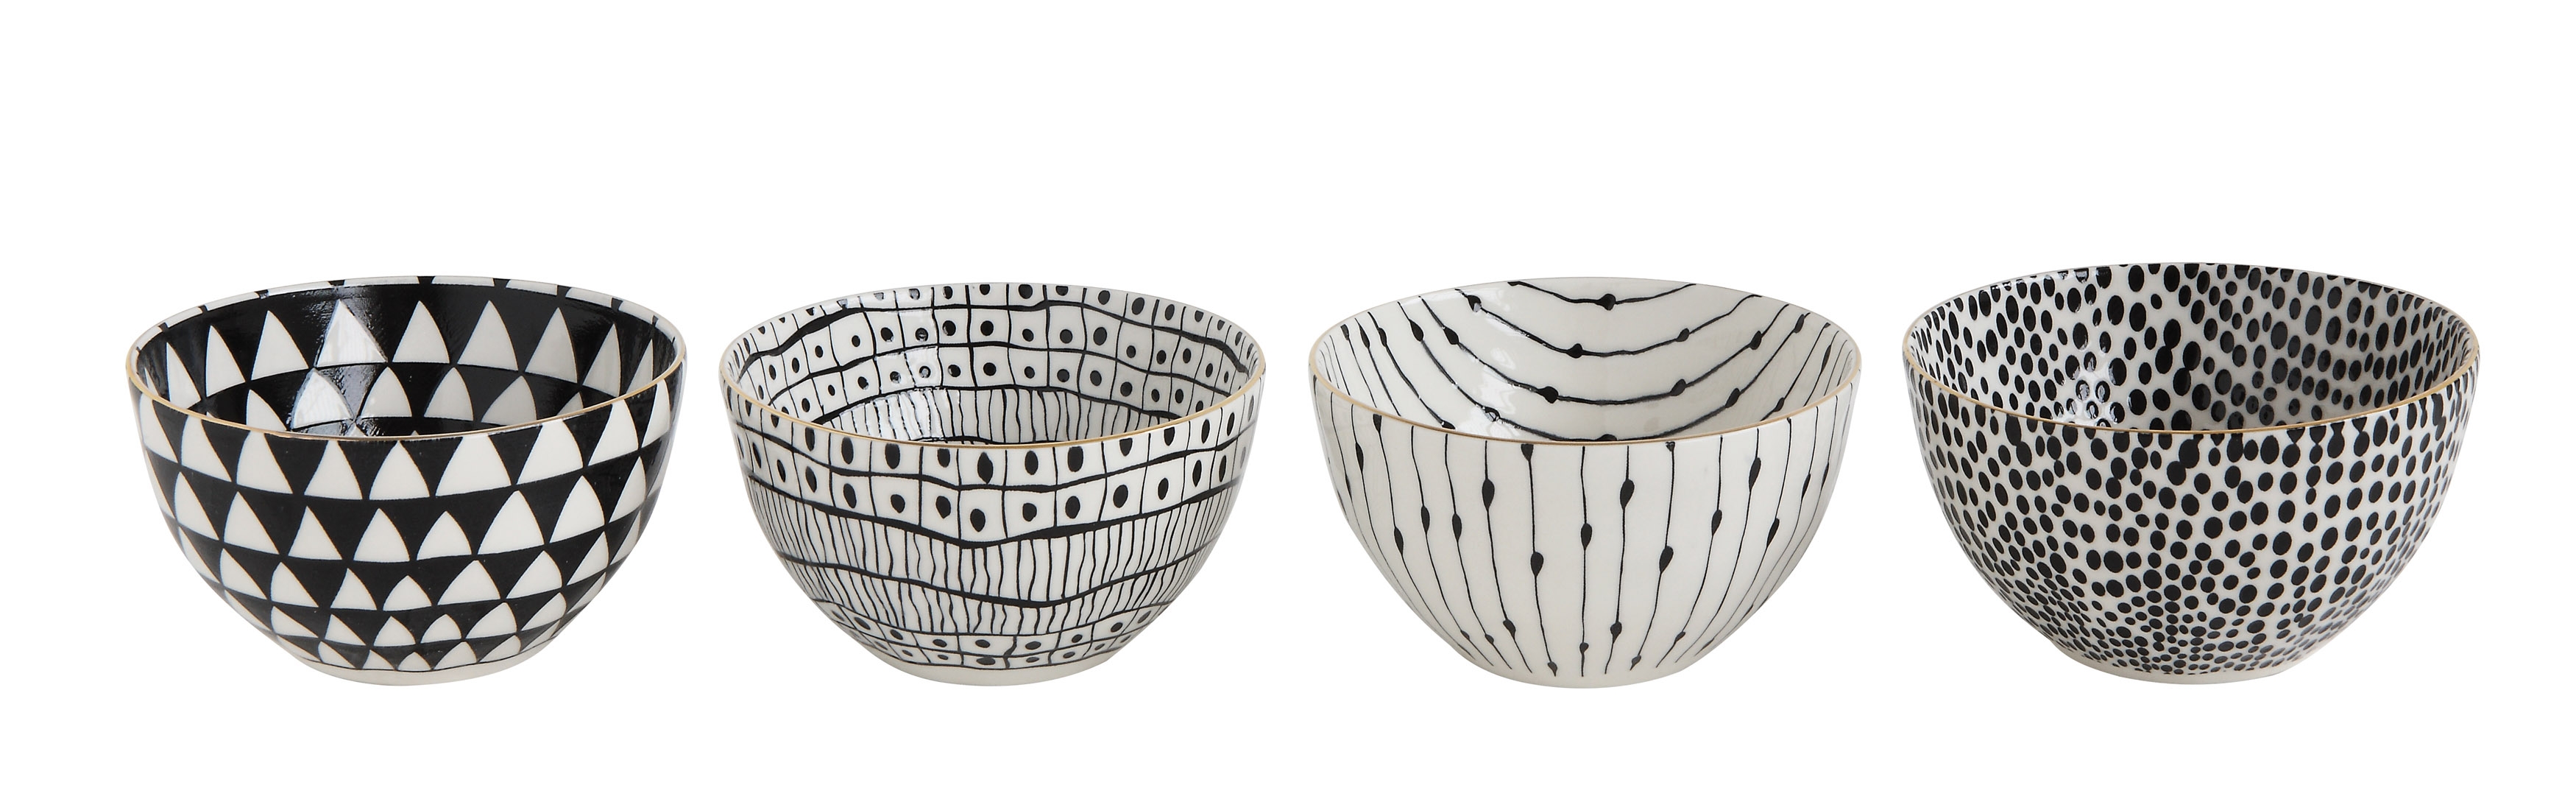 White & Black Bowls with Varying Designs (Set of 4 Designs) - Image 0